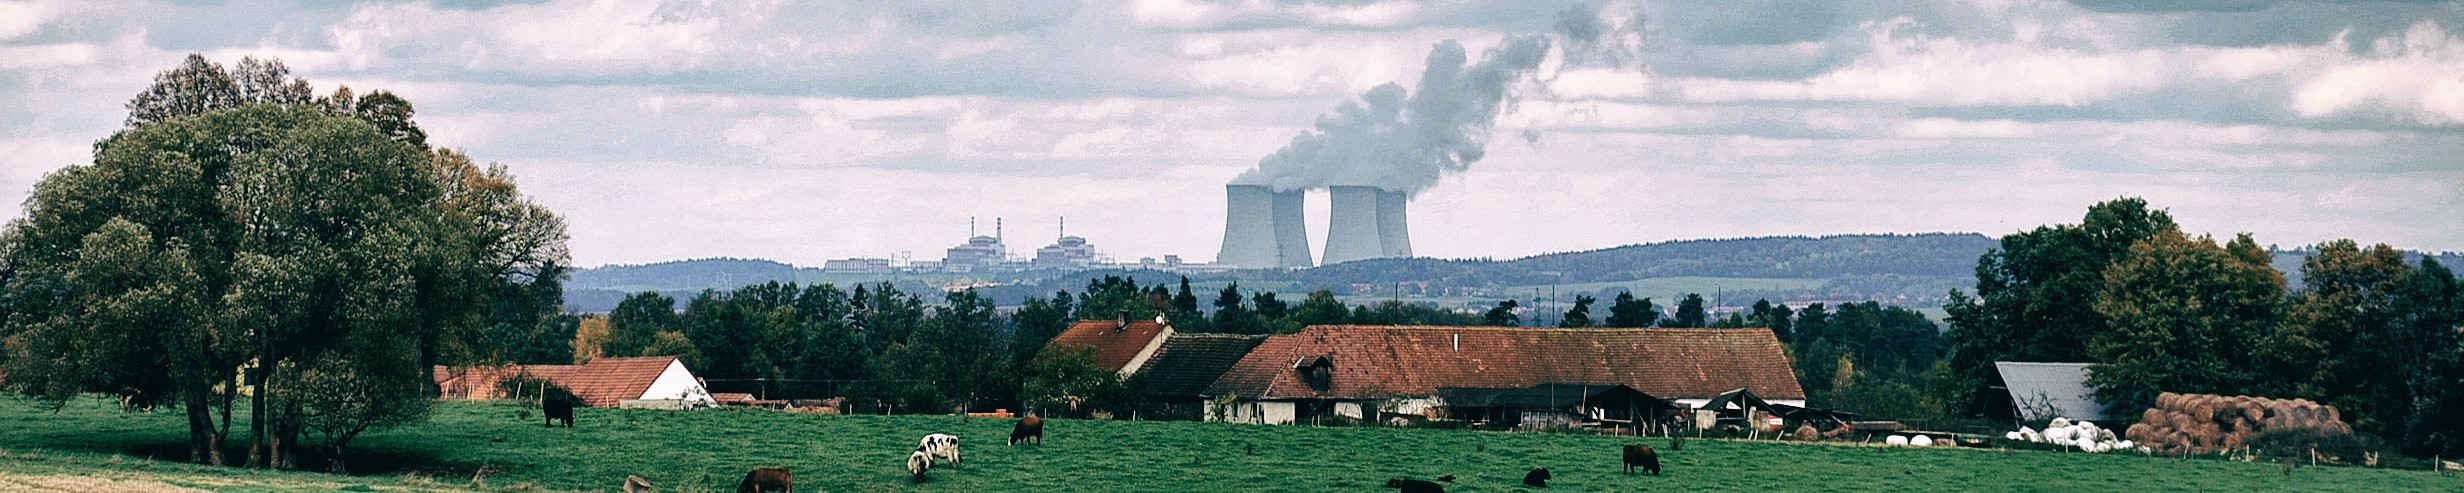 Cooling towers at a power plant.